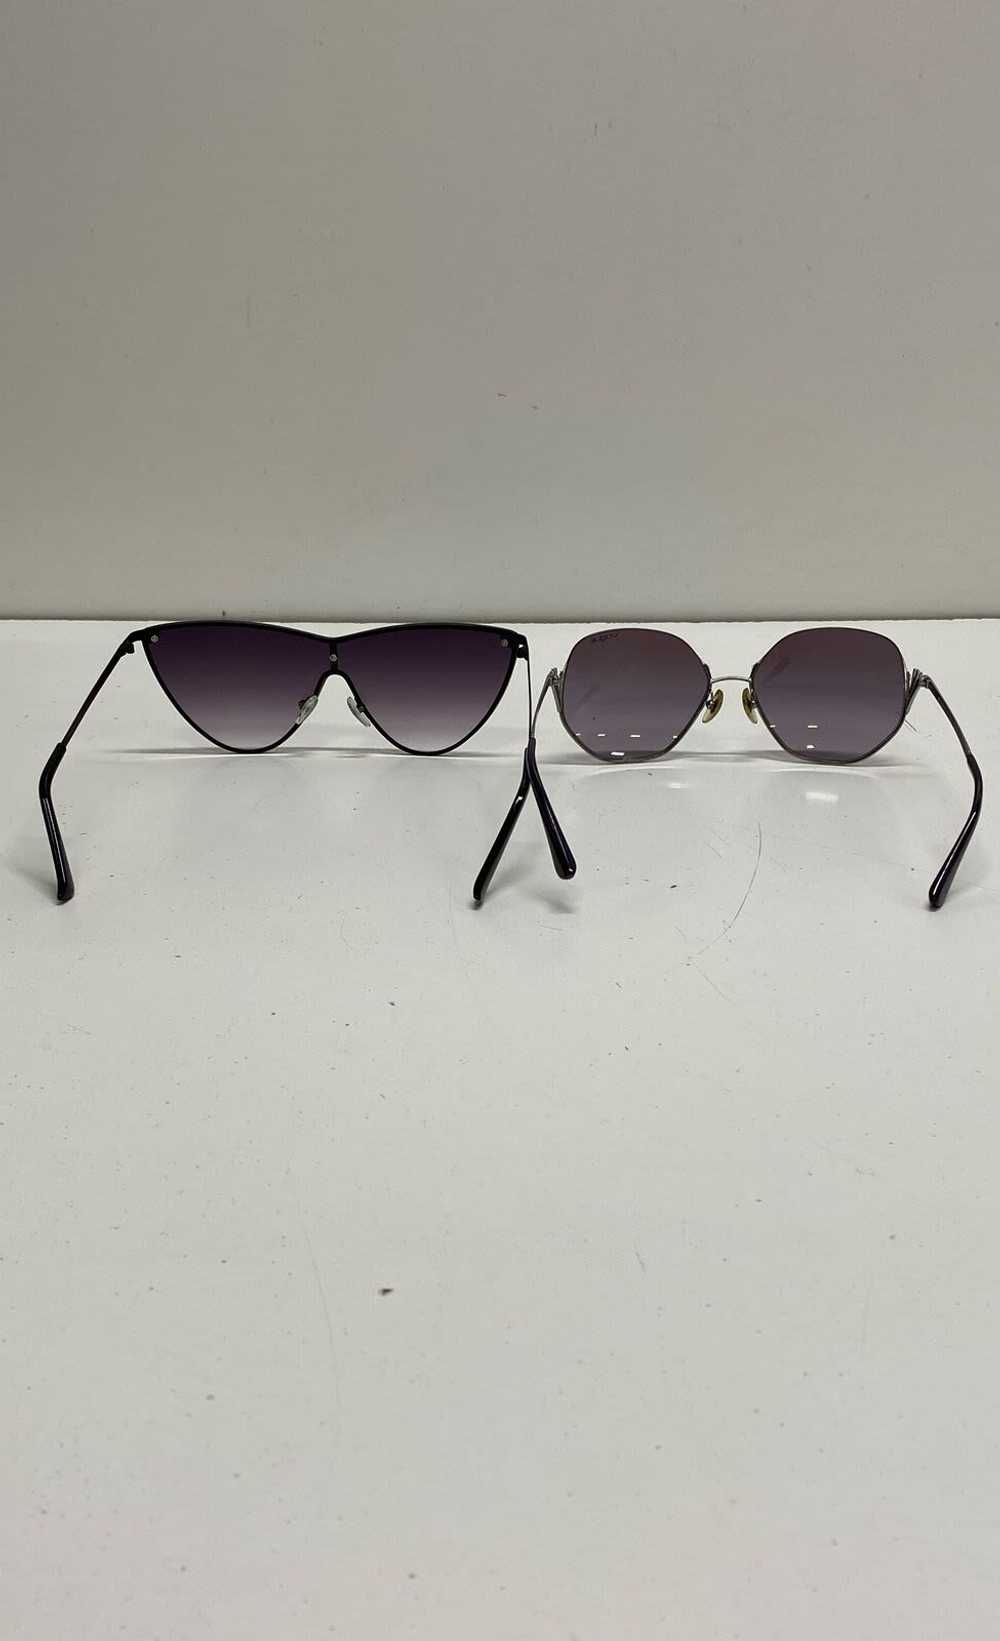 Unbranded Multicolor Sunglasses - 2 Pairs No Case - image 3